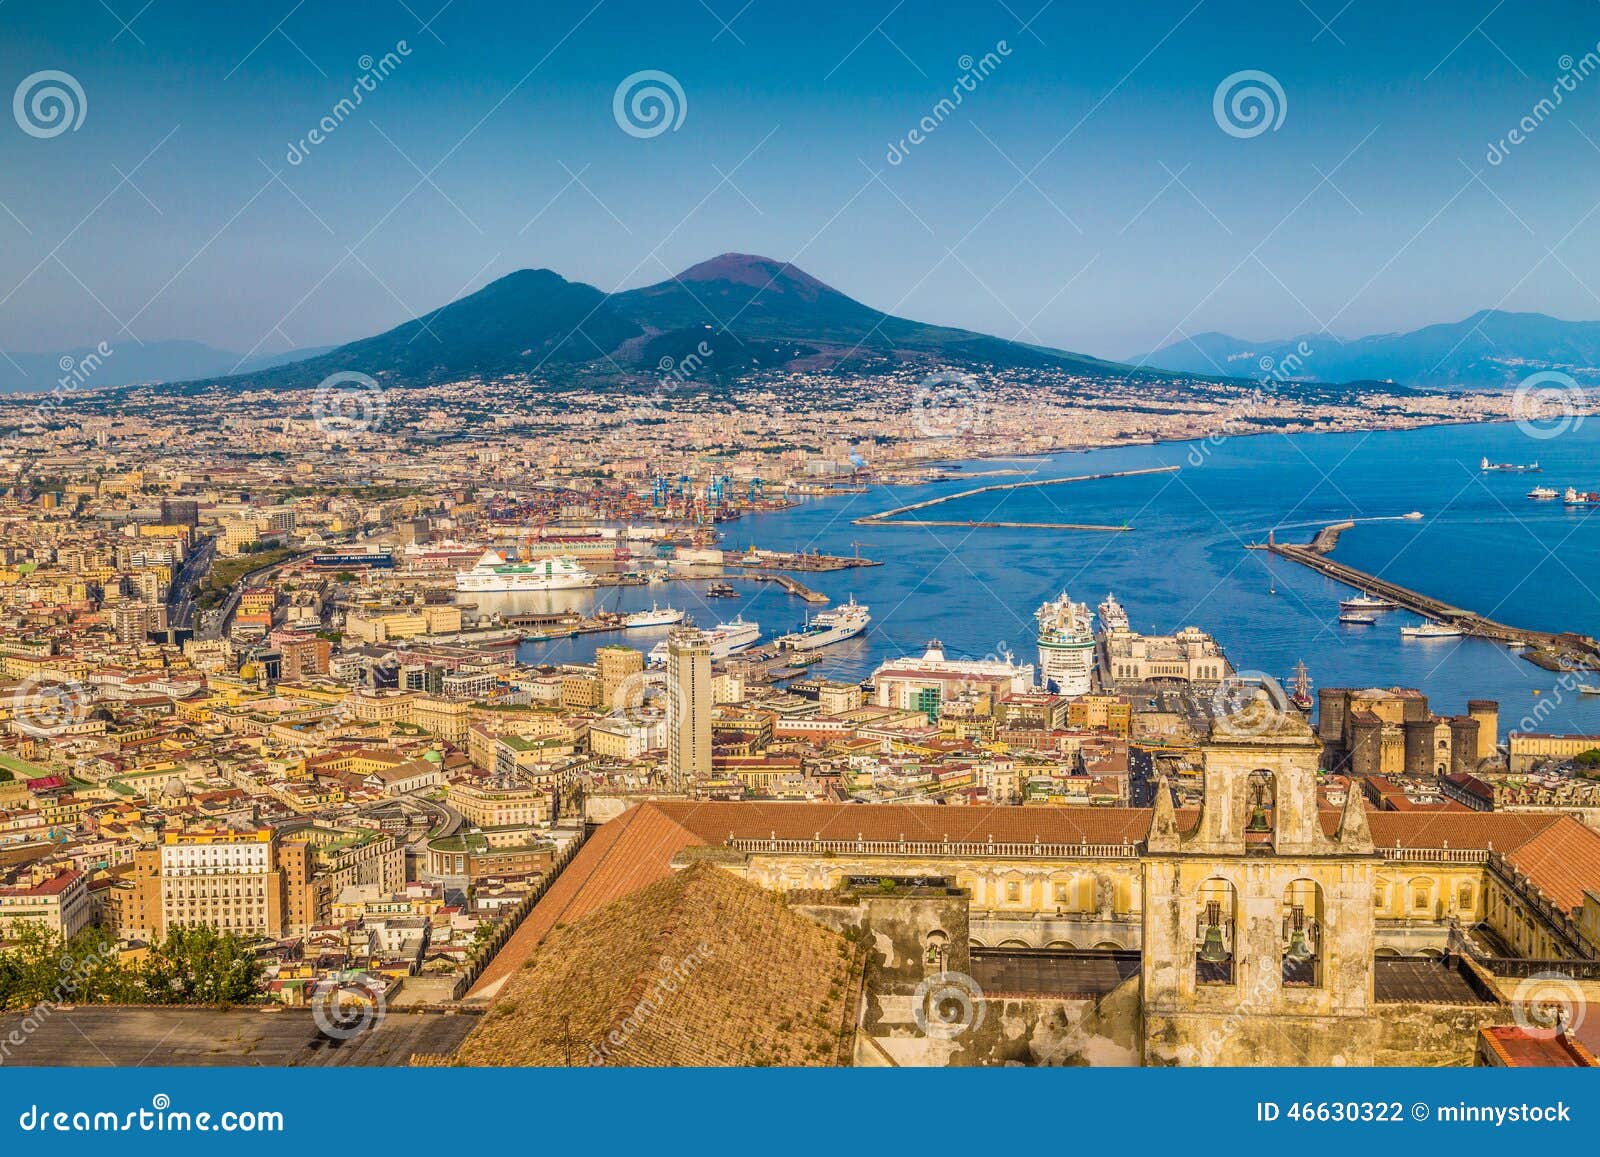 city of naples with mt. vesuvius at sunset, campania, italy